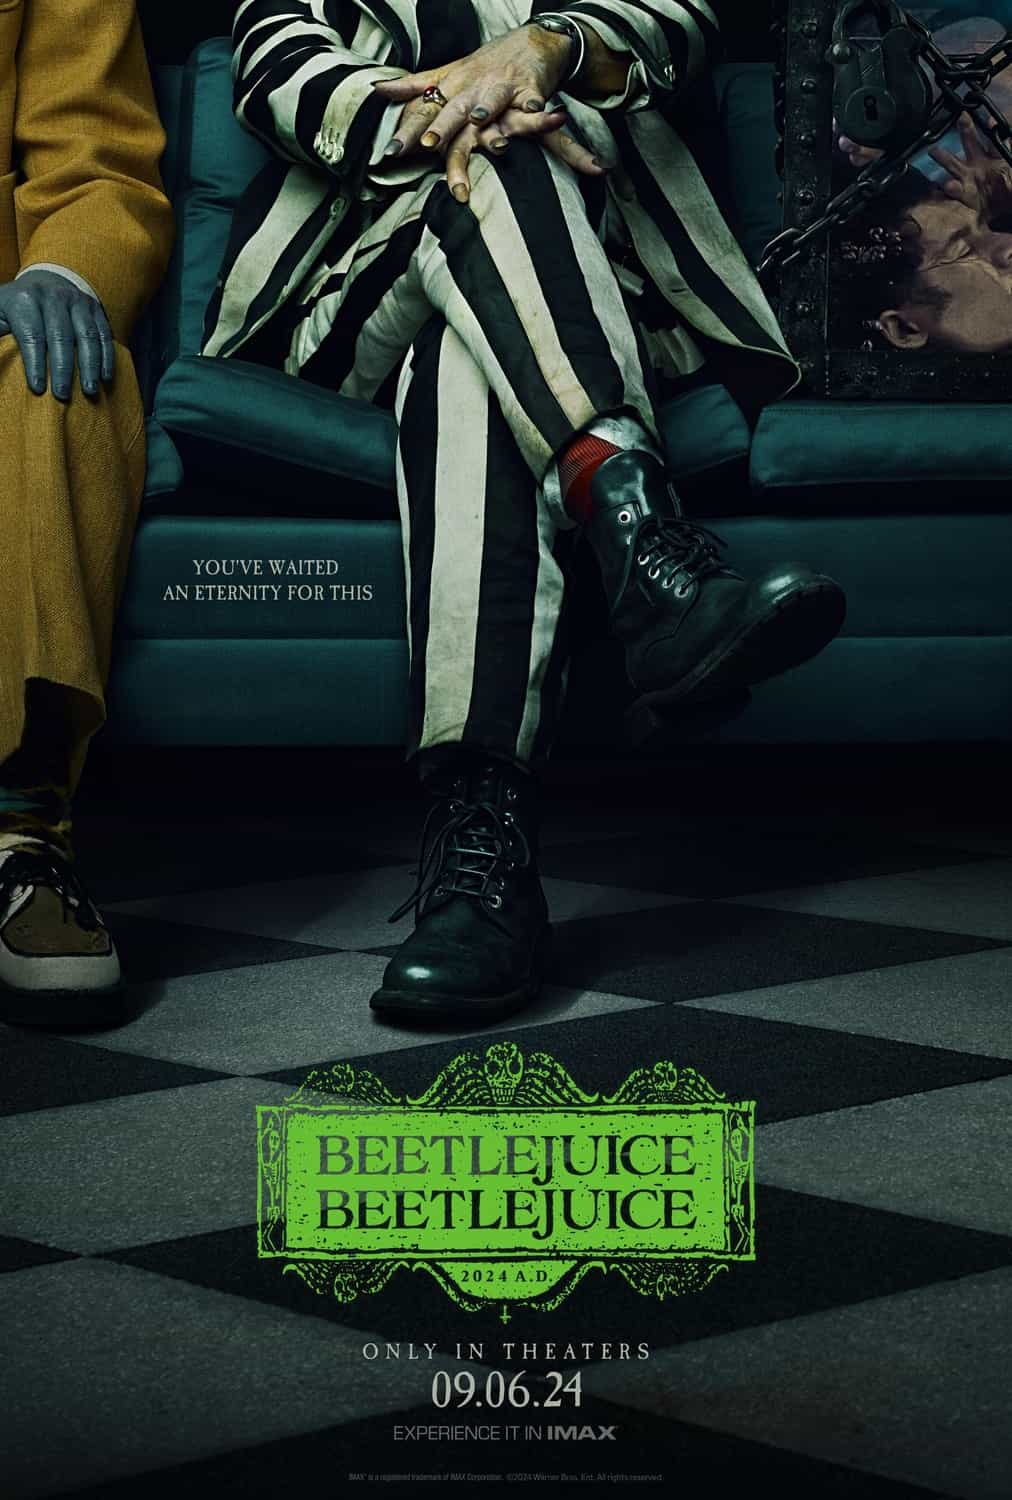 Check out the new trailer for upcoming movie Beetlejuice Beetlejuice which stars Michael Keaton and Jenna Ortega - movie UK release date 6th September 2024 #beetlejuicebeetlejuice